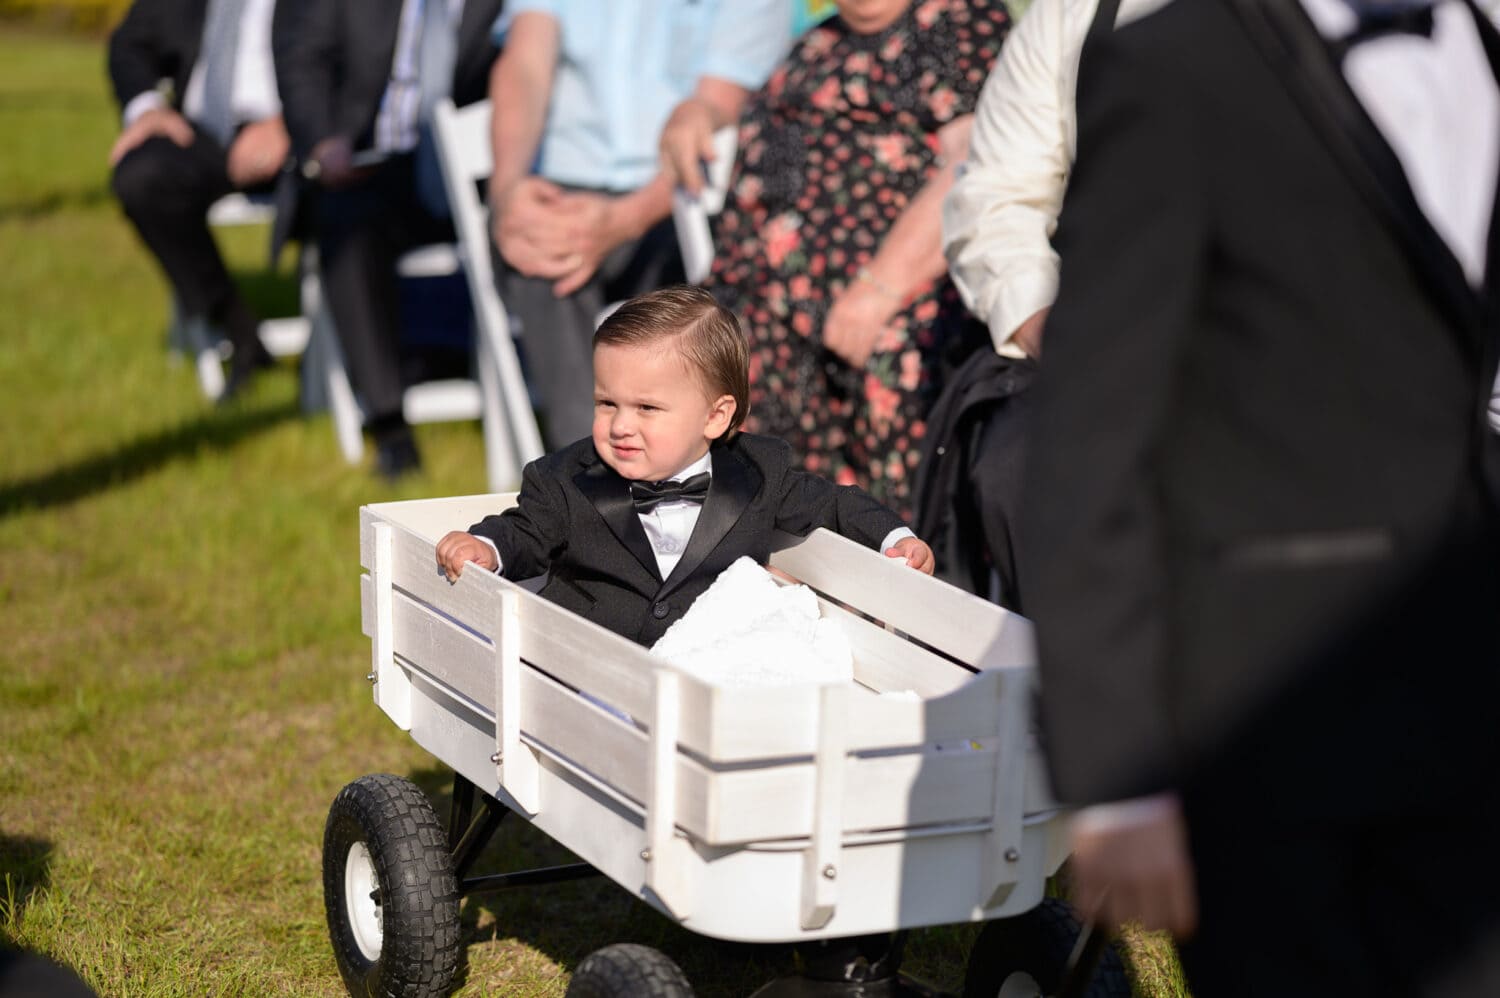 Ring-bearer riding in wagon - The Venue at White Oaks Farm